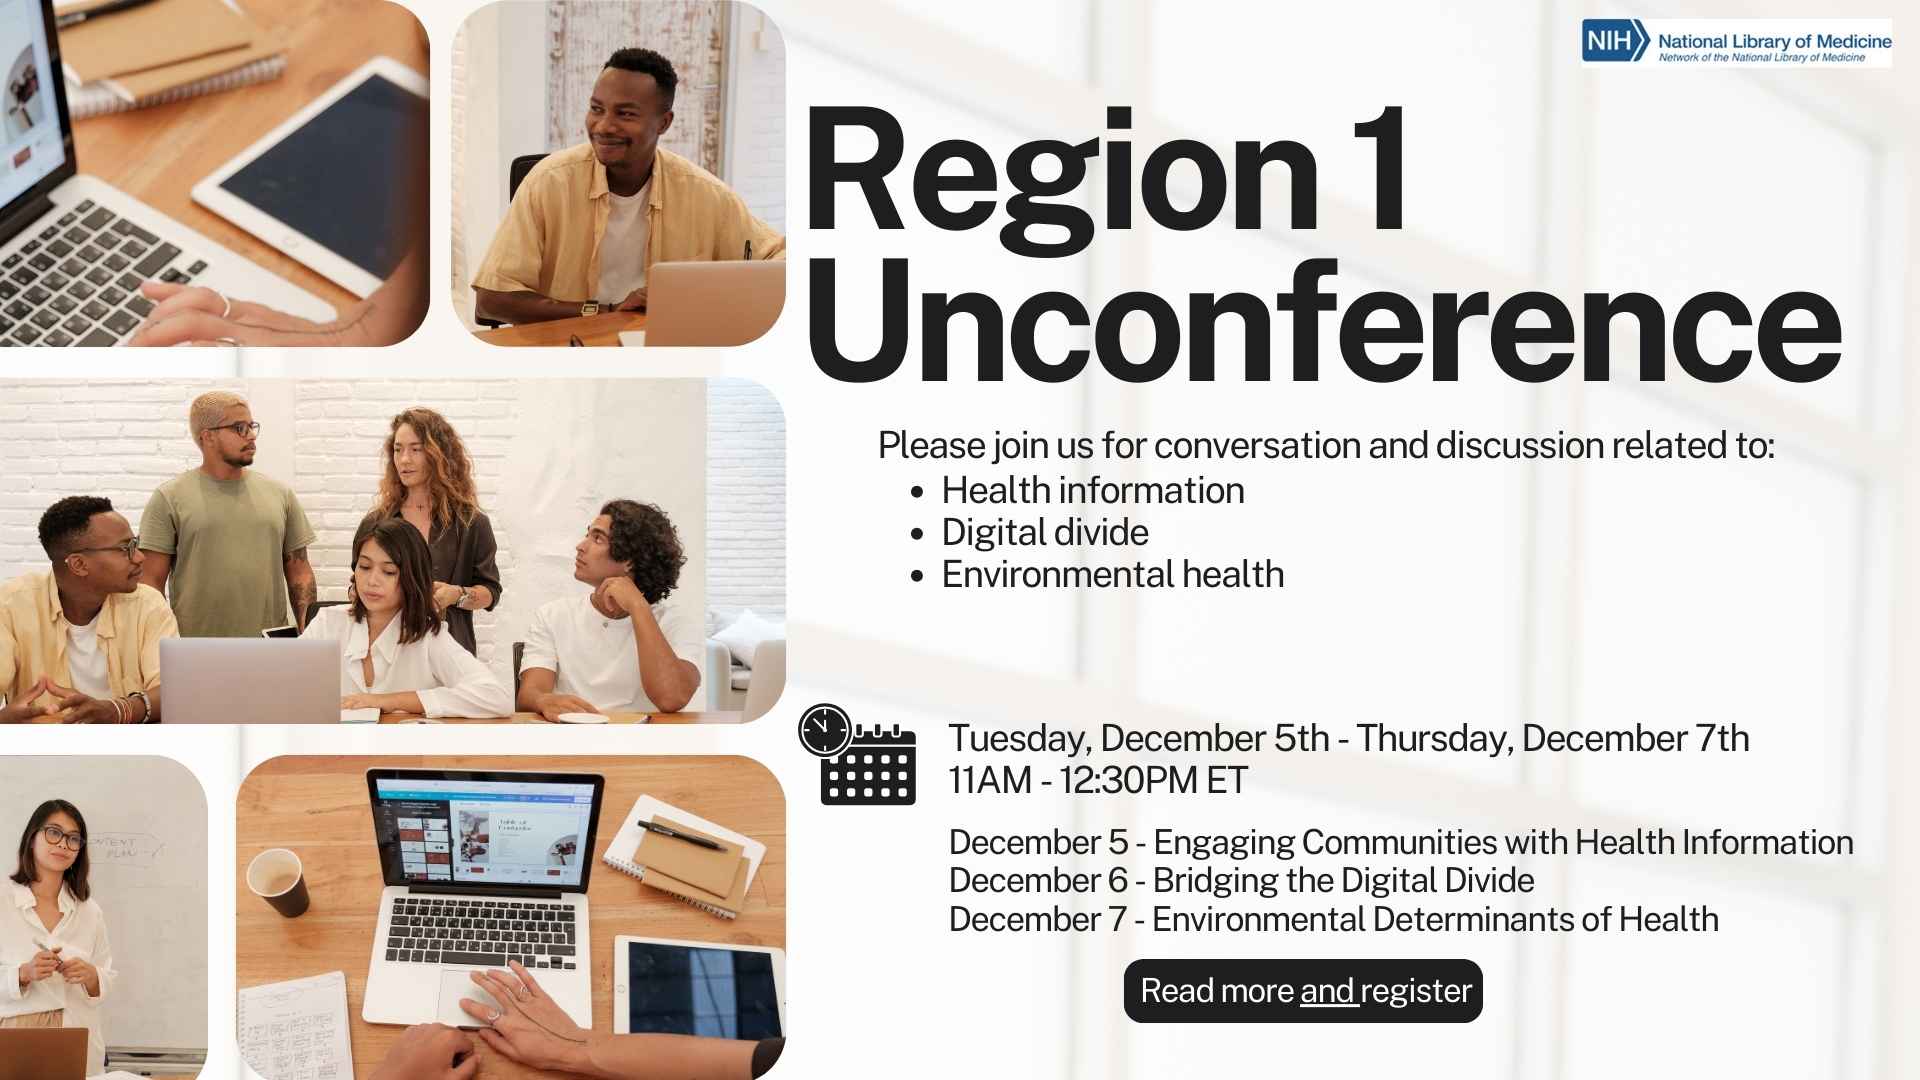 Flyer for Region 1 Unconference  date December 5 through 7th 11AM to 12:30PM with white background with three pictures, first picture of man with a laptop, second picture of a group of people around a laptop and one picture of a person's hand using a laptop